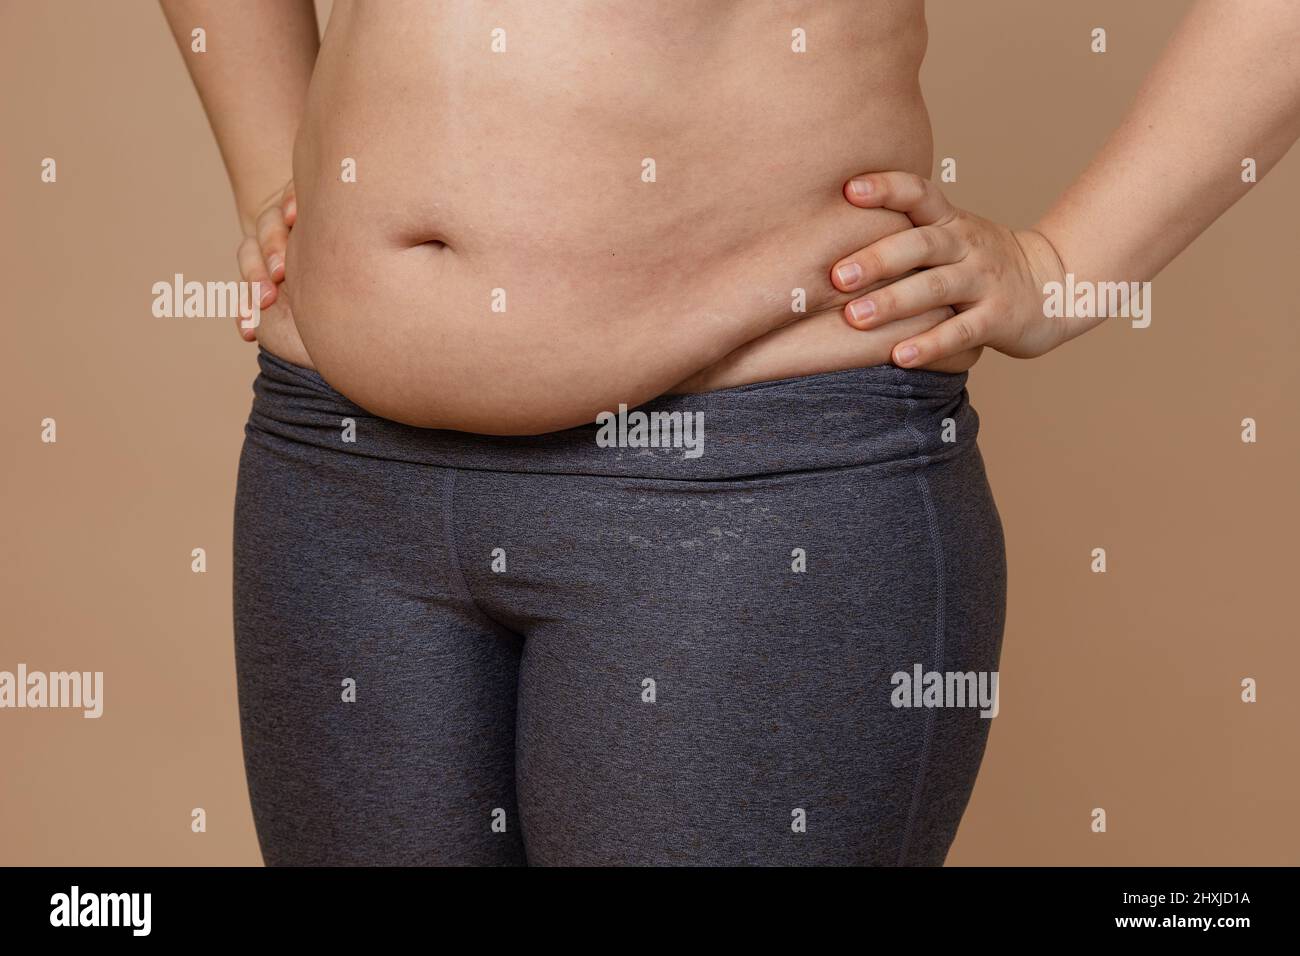 Front view of overweighted thick belly of woman wearing leggings